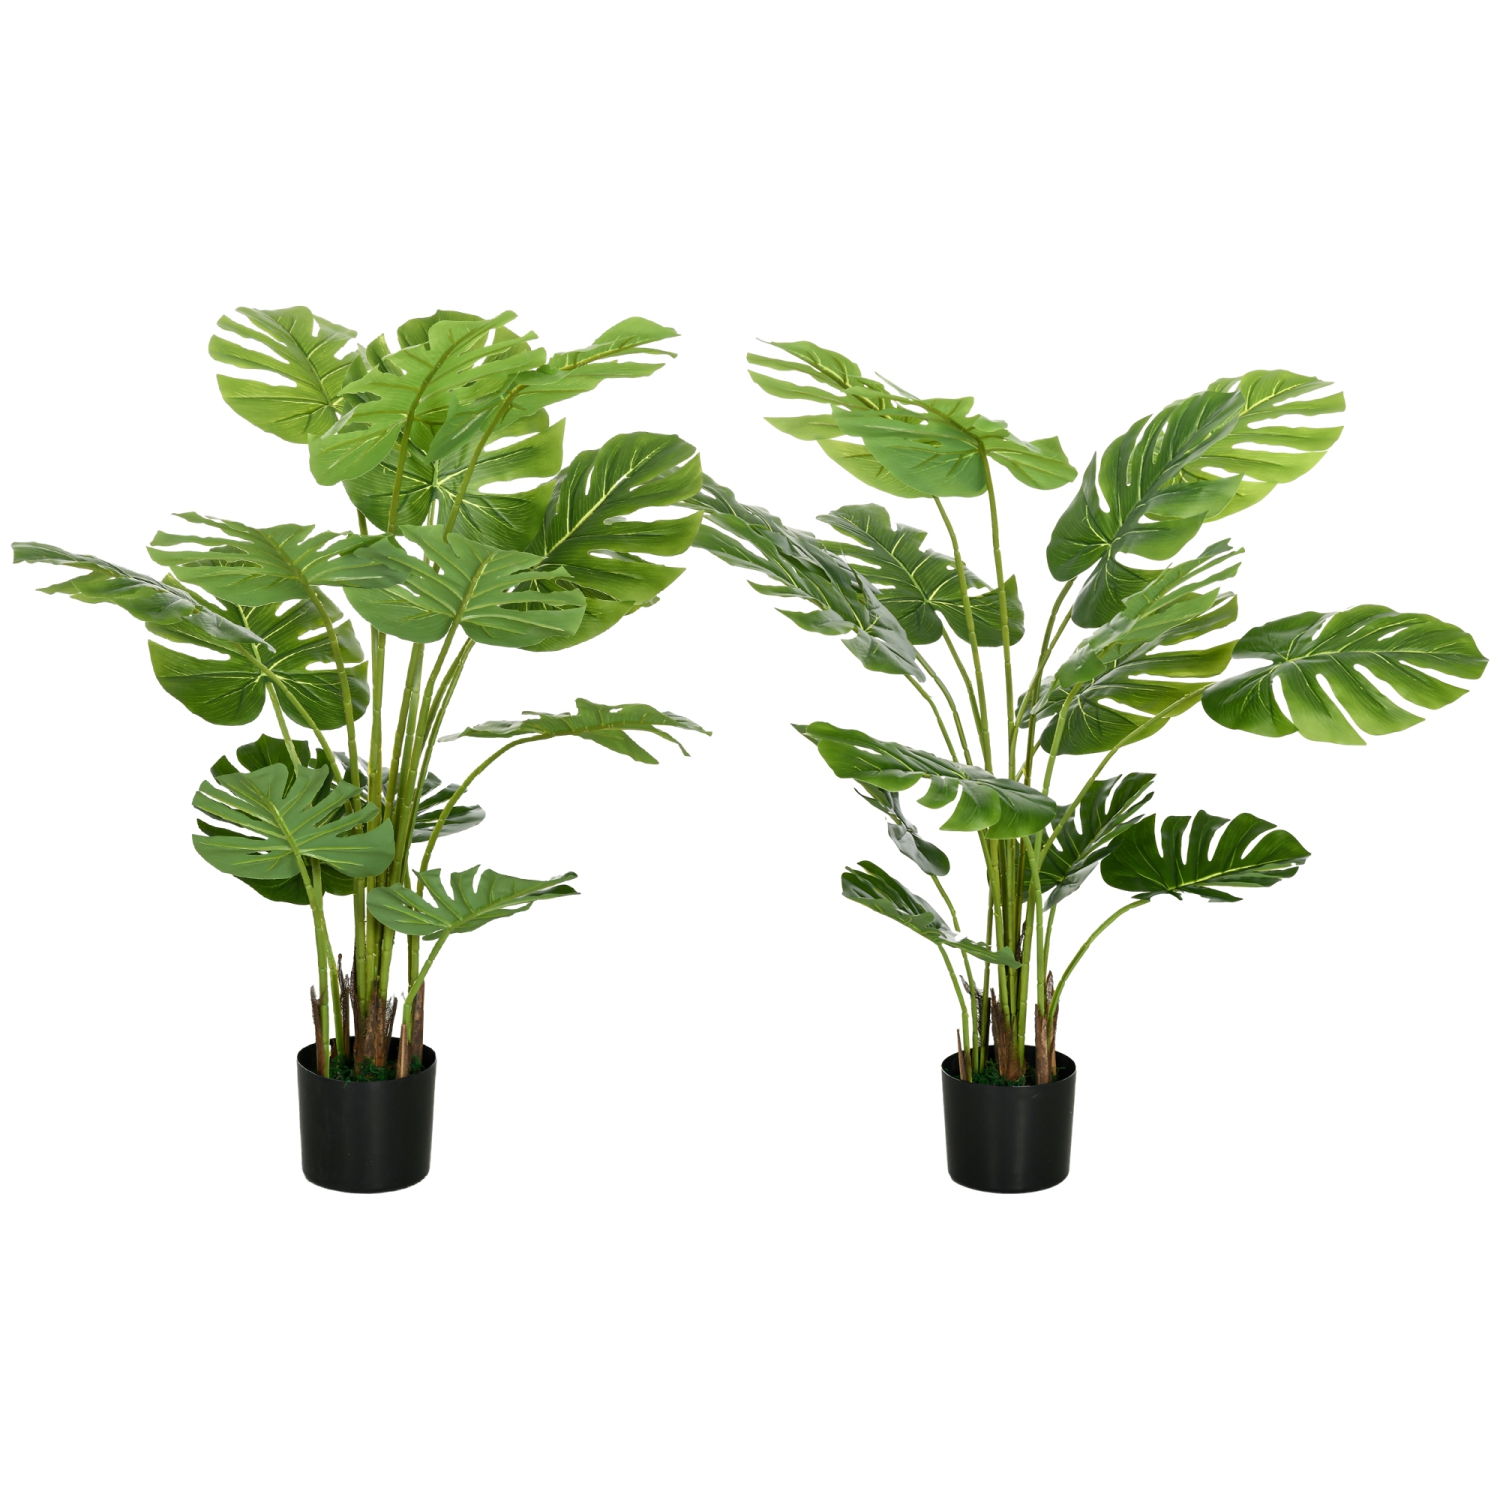 HOMCOM 4ft Set of 2 Artificial Monstera Deliciosa with Pot, Indoor Outdoor Fake Plants Tropical Palm for Home Office Living Room Decor